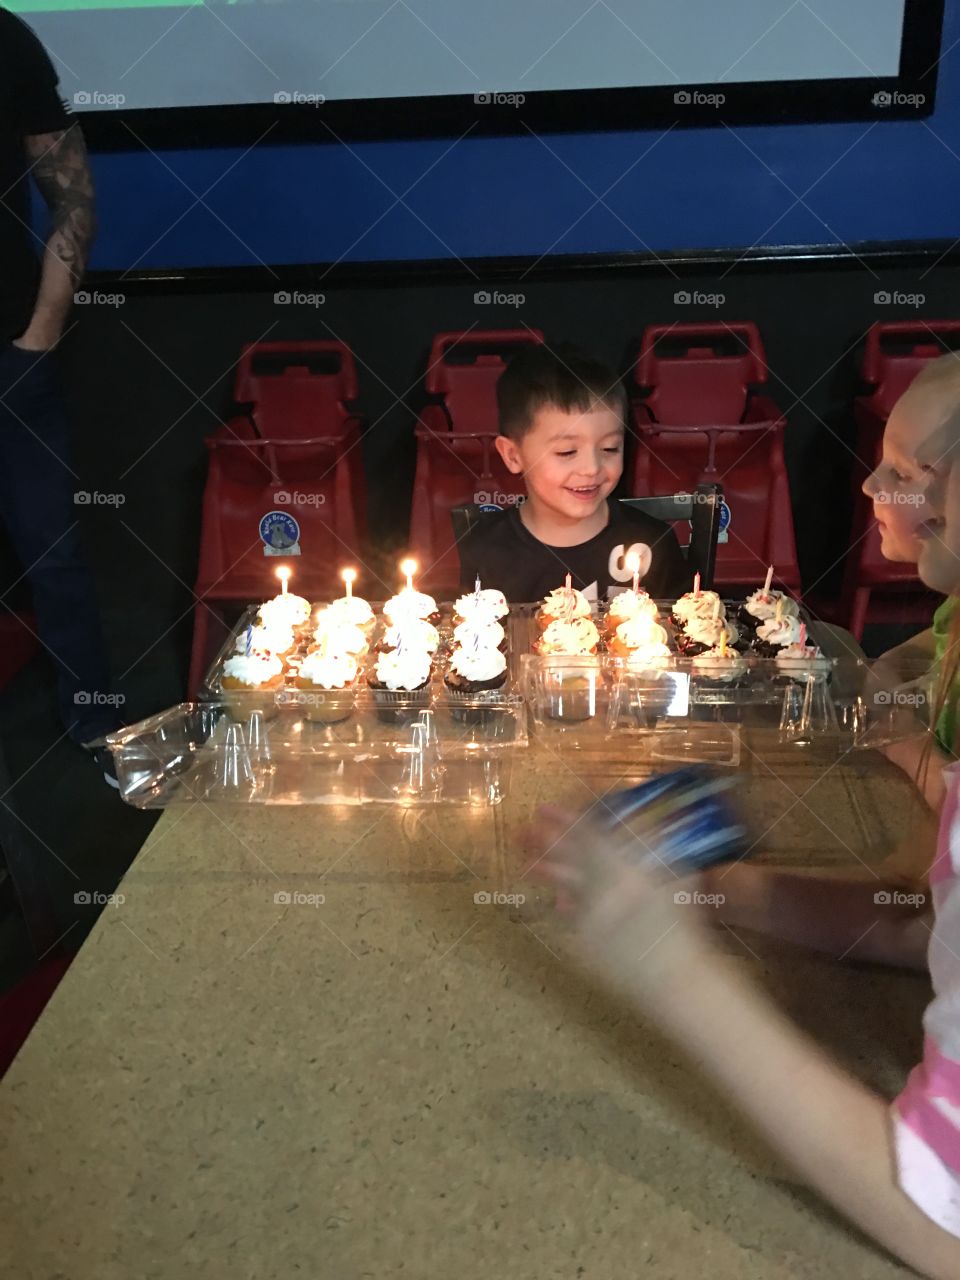 Blow out the candles 